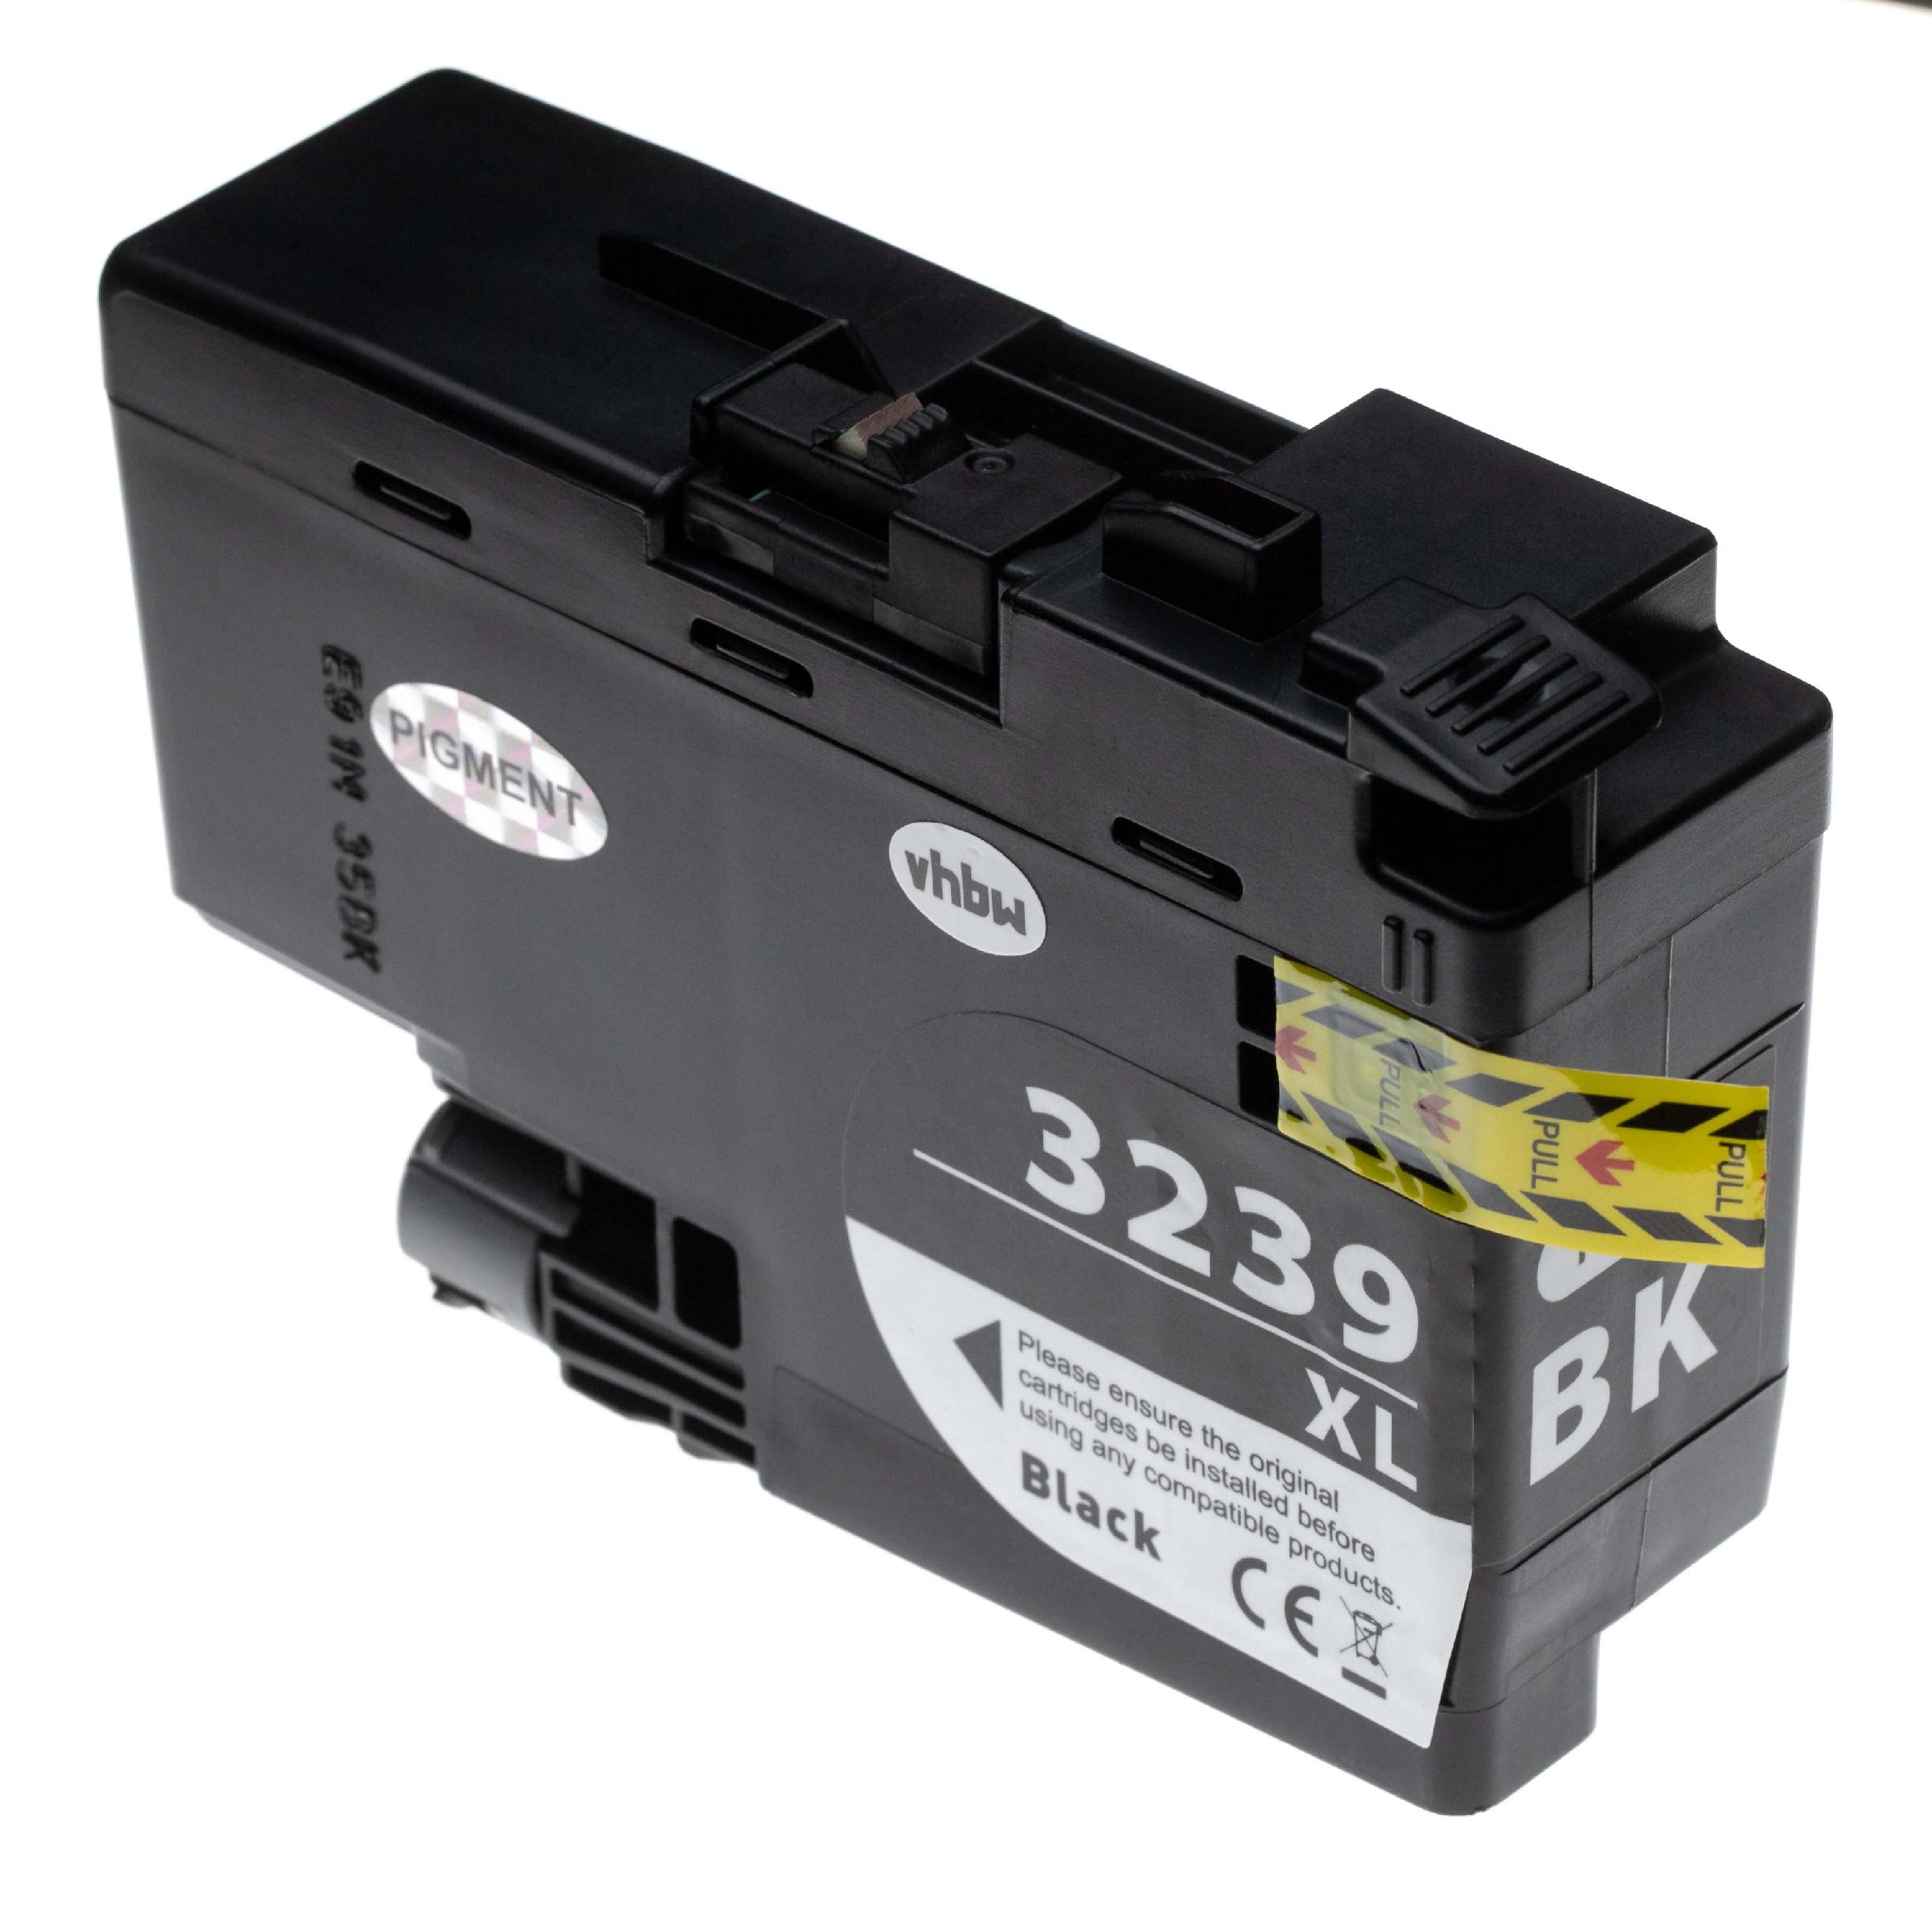 Ink Cartridge as Exchange for Brother LC-3239XLBK, LC3239XLBK for Brother Printer - Black 128 ml + Chip